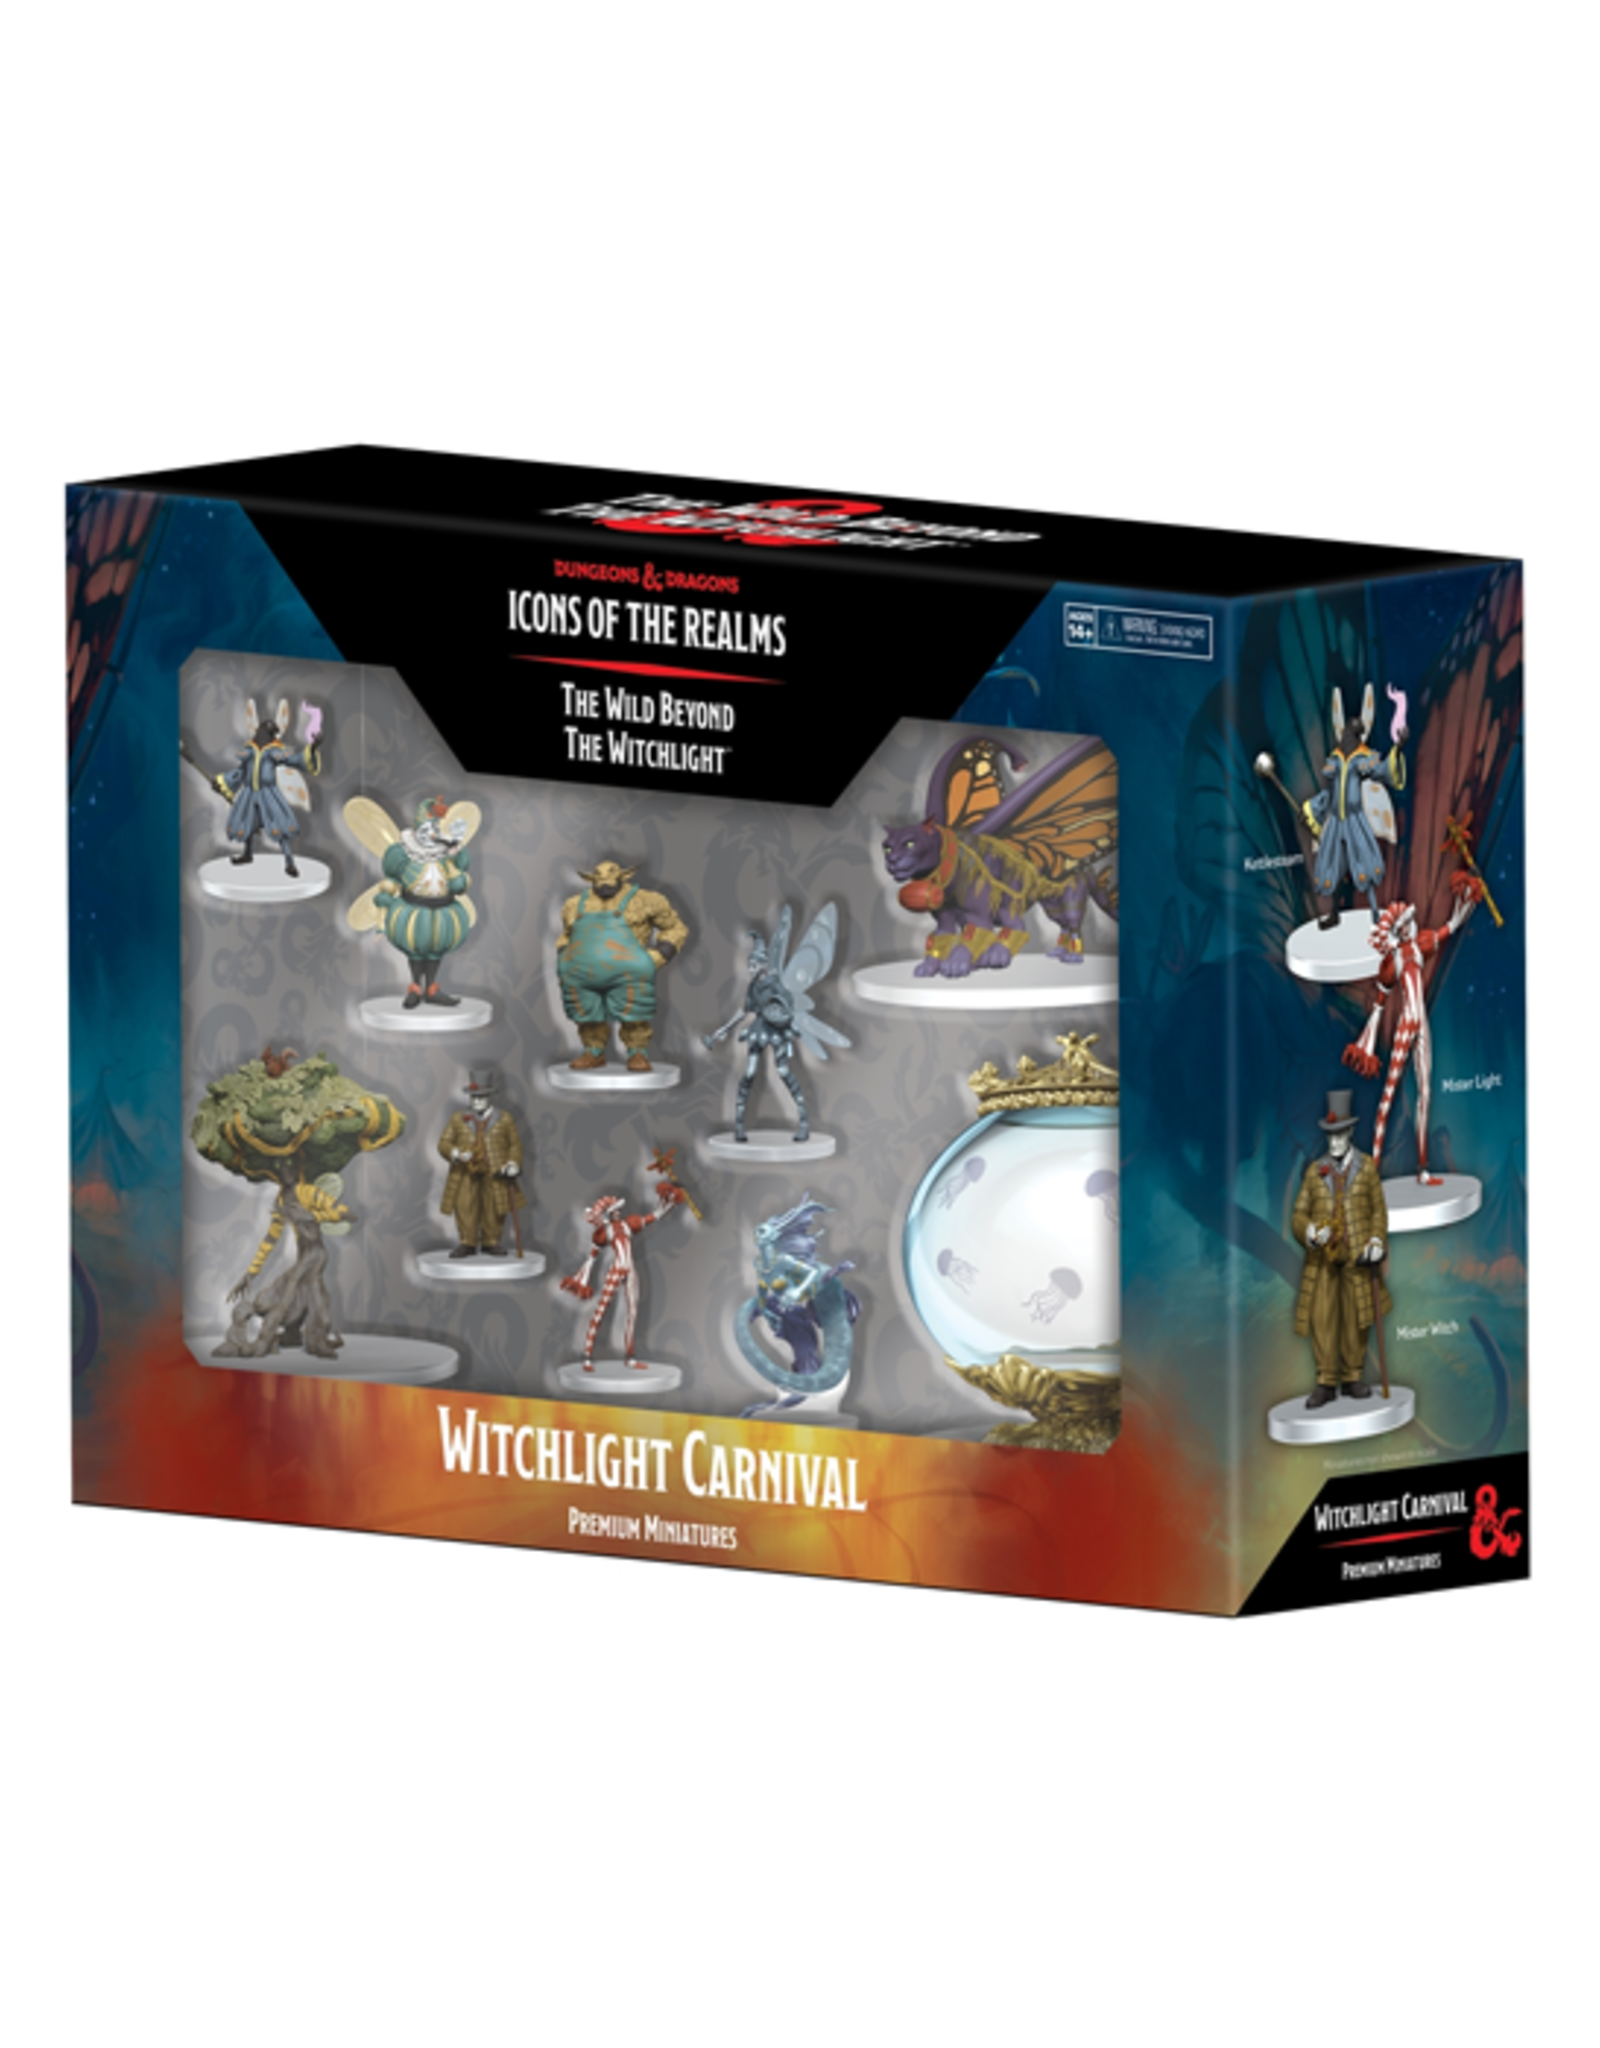 Dungeons & Dragons Dungeons & Dragons: Icons of the Realms - The Wild Beyond the Witchlight - Witchlight Carnival